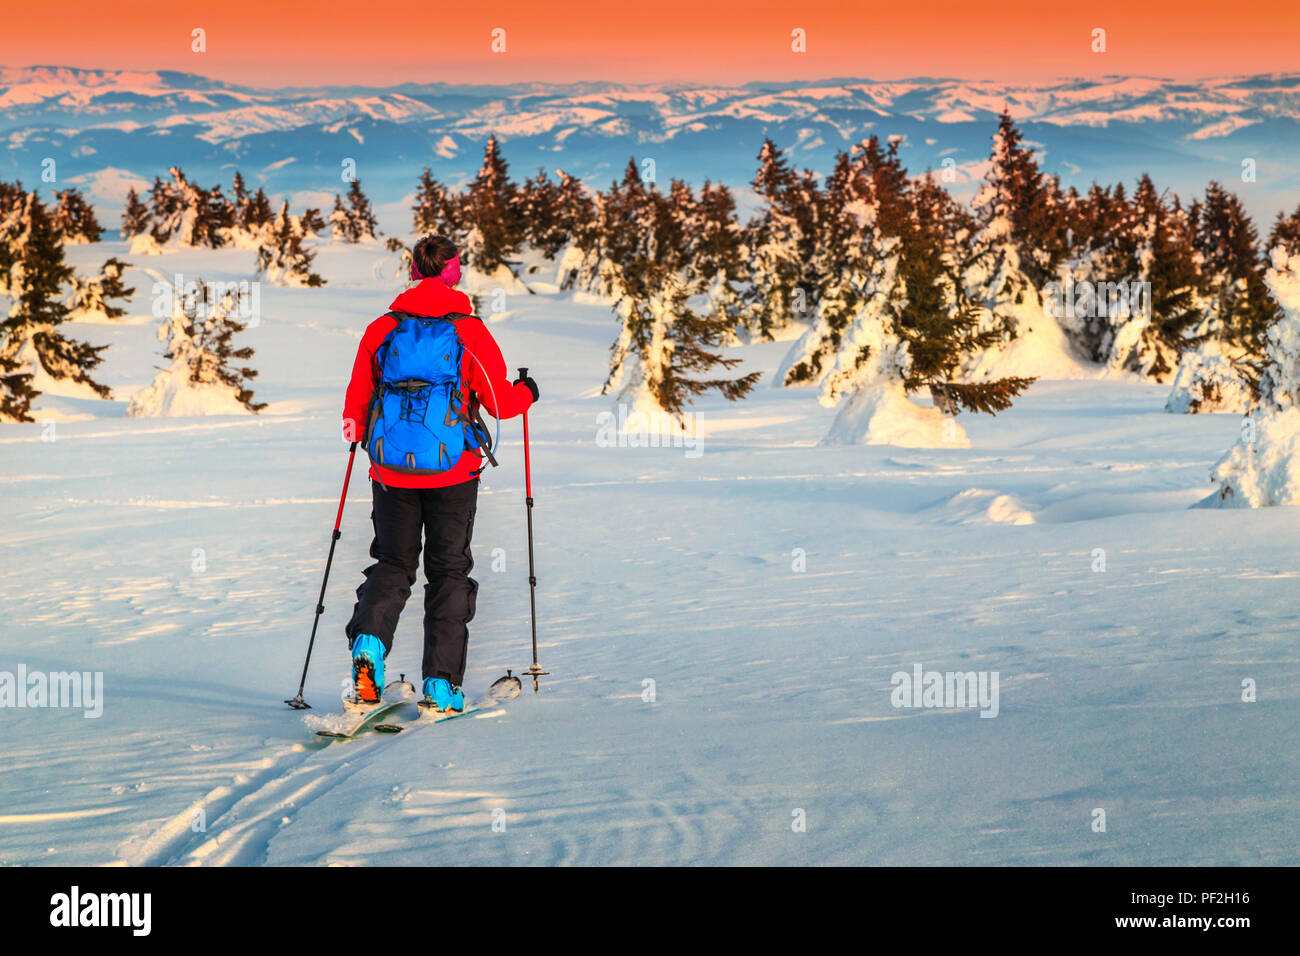 Ski touring in high alpine landscape with backpack. Adventure, winter activities, skitouring in spectacular mountains, Transylvania, Romania, Europe Stock Photo